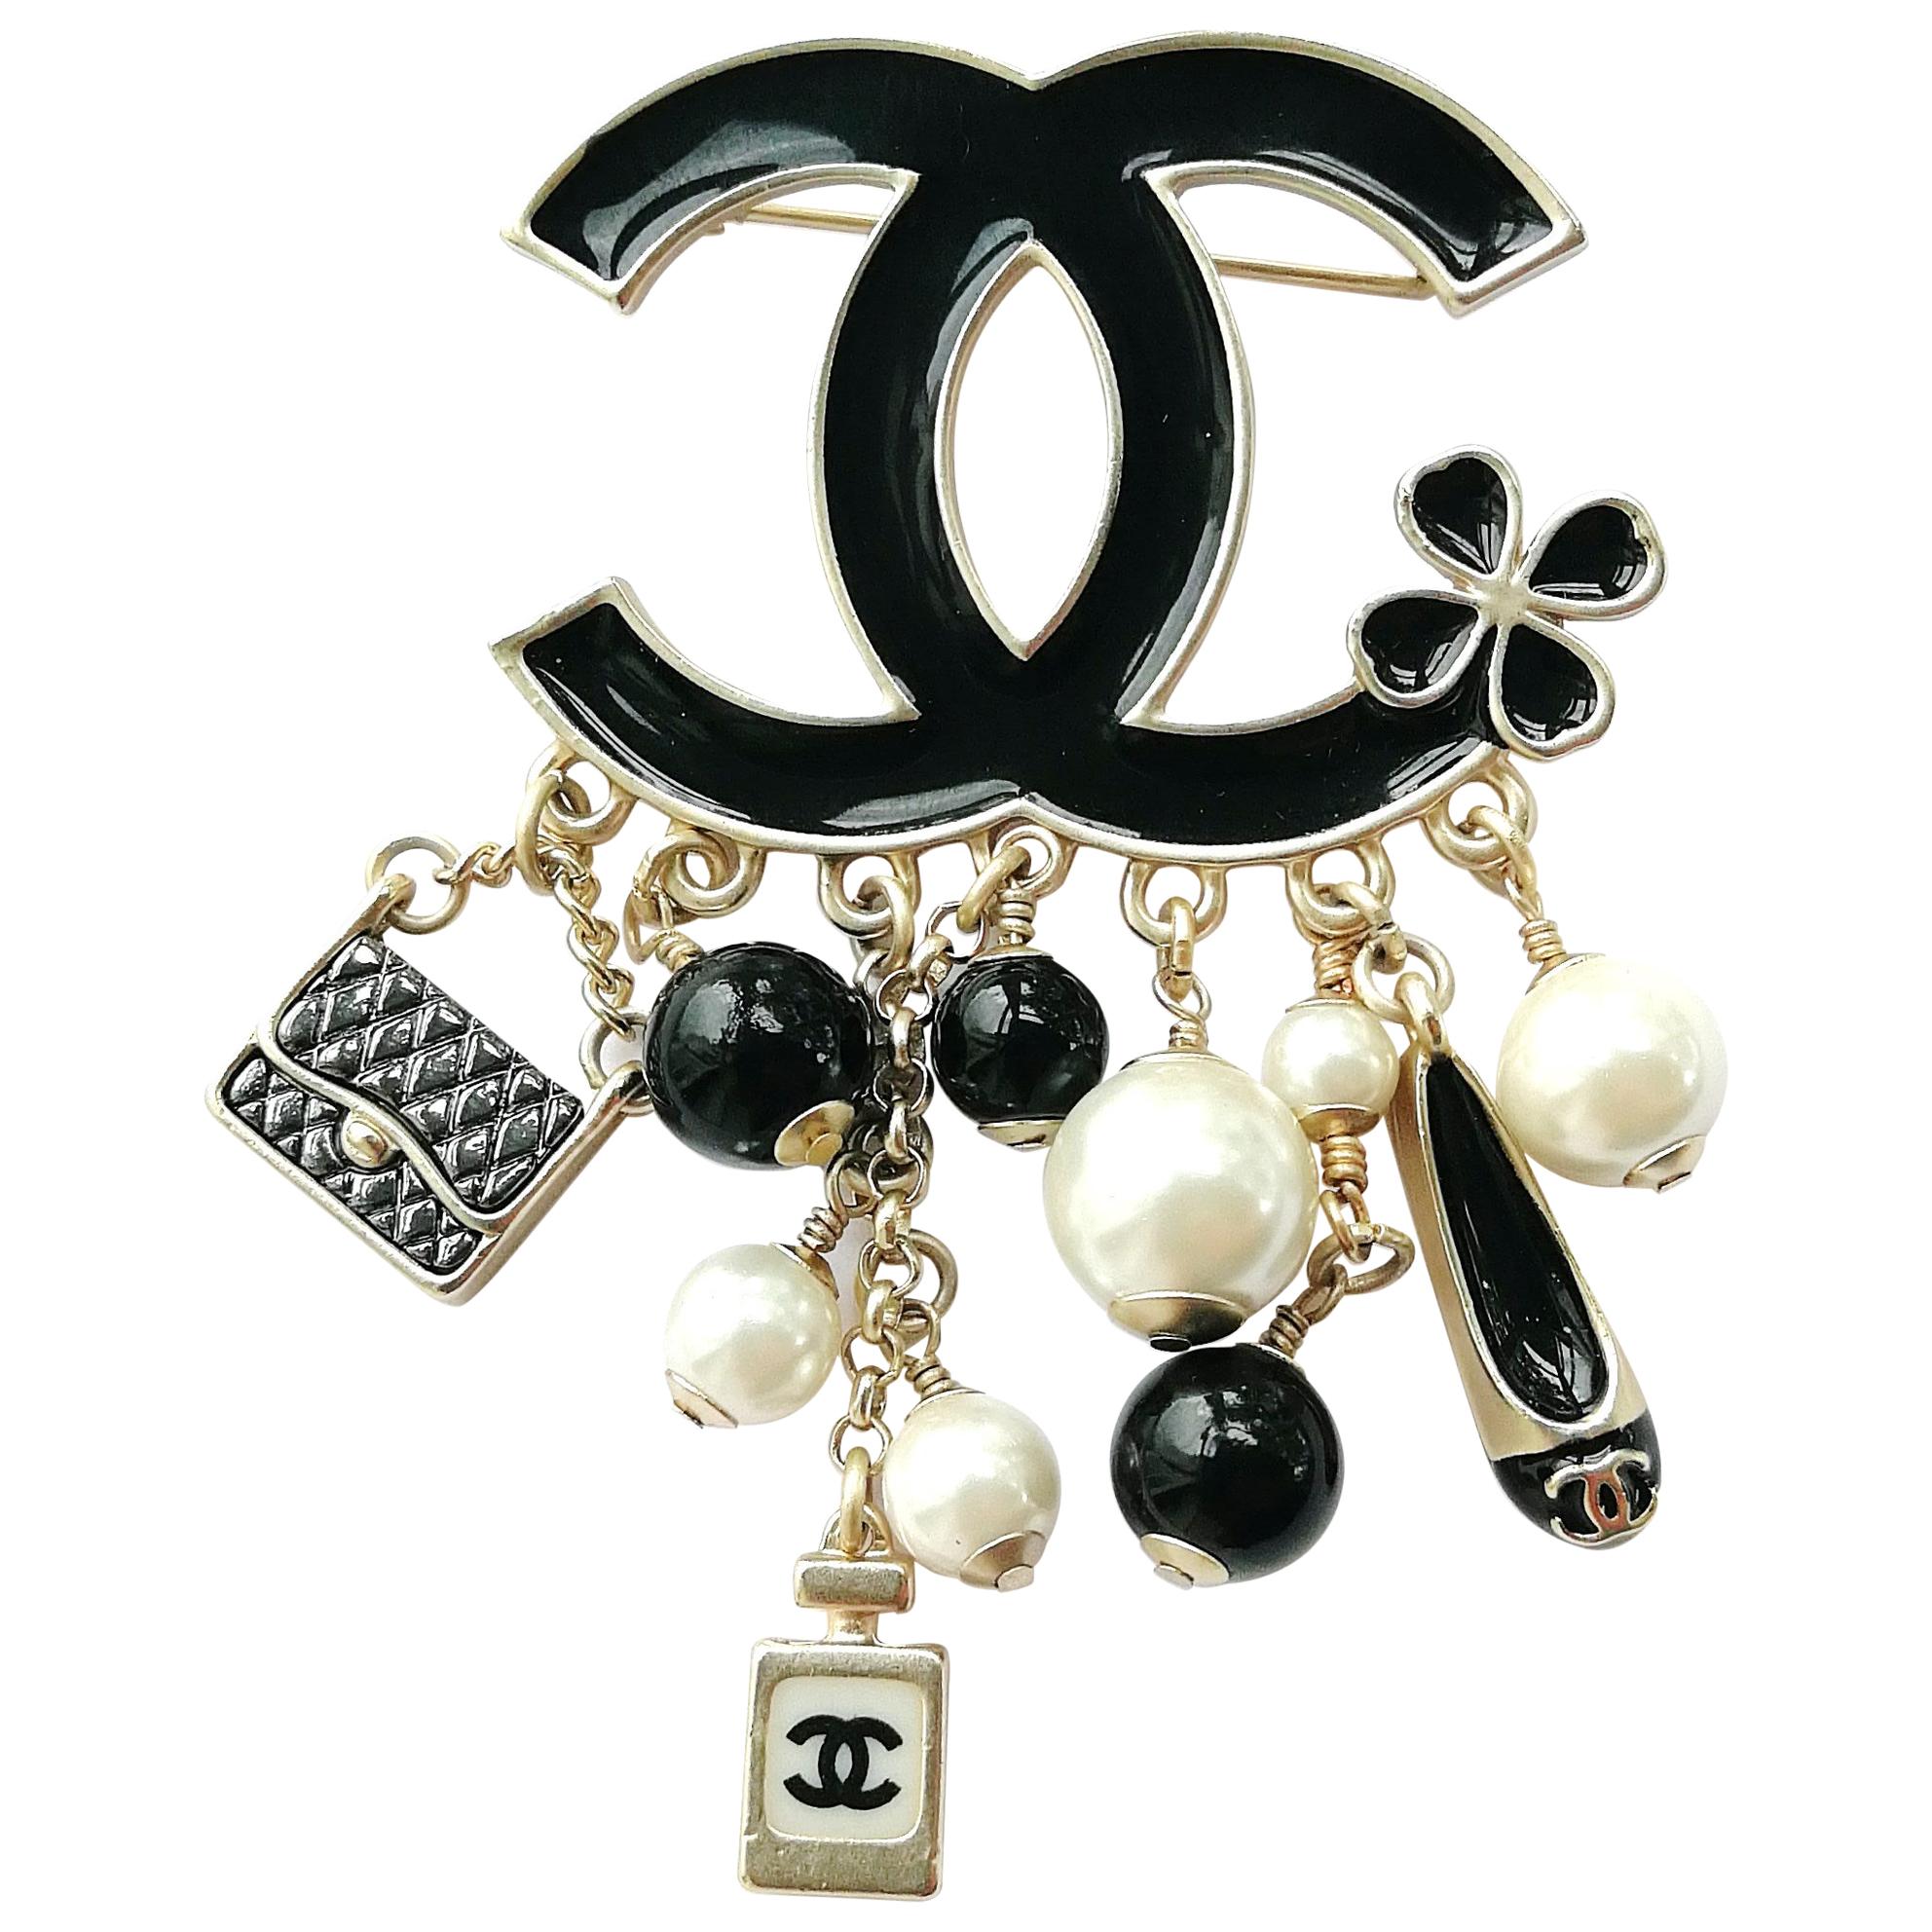 Resin, Enamel and Ruthenium Metal Pin brooch featuring polish coloured  beads and a silver chain charm with classic Chanel logo pendents. Chanel.  2012., Handbags and Accessories Online, Ecommerce Retail